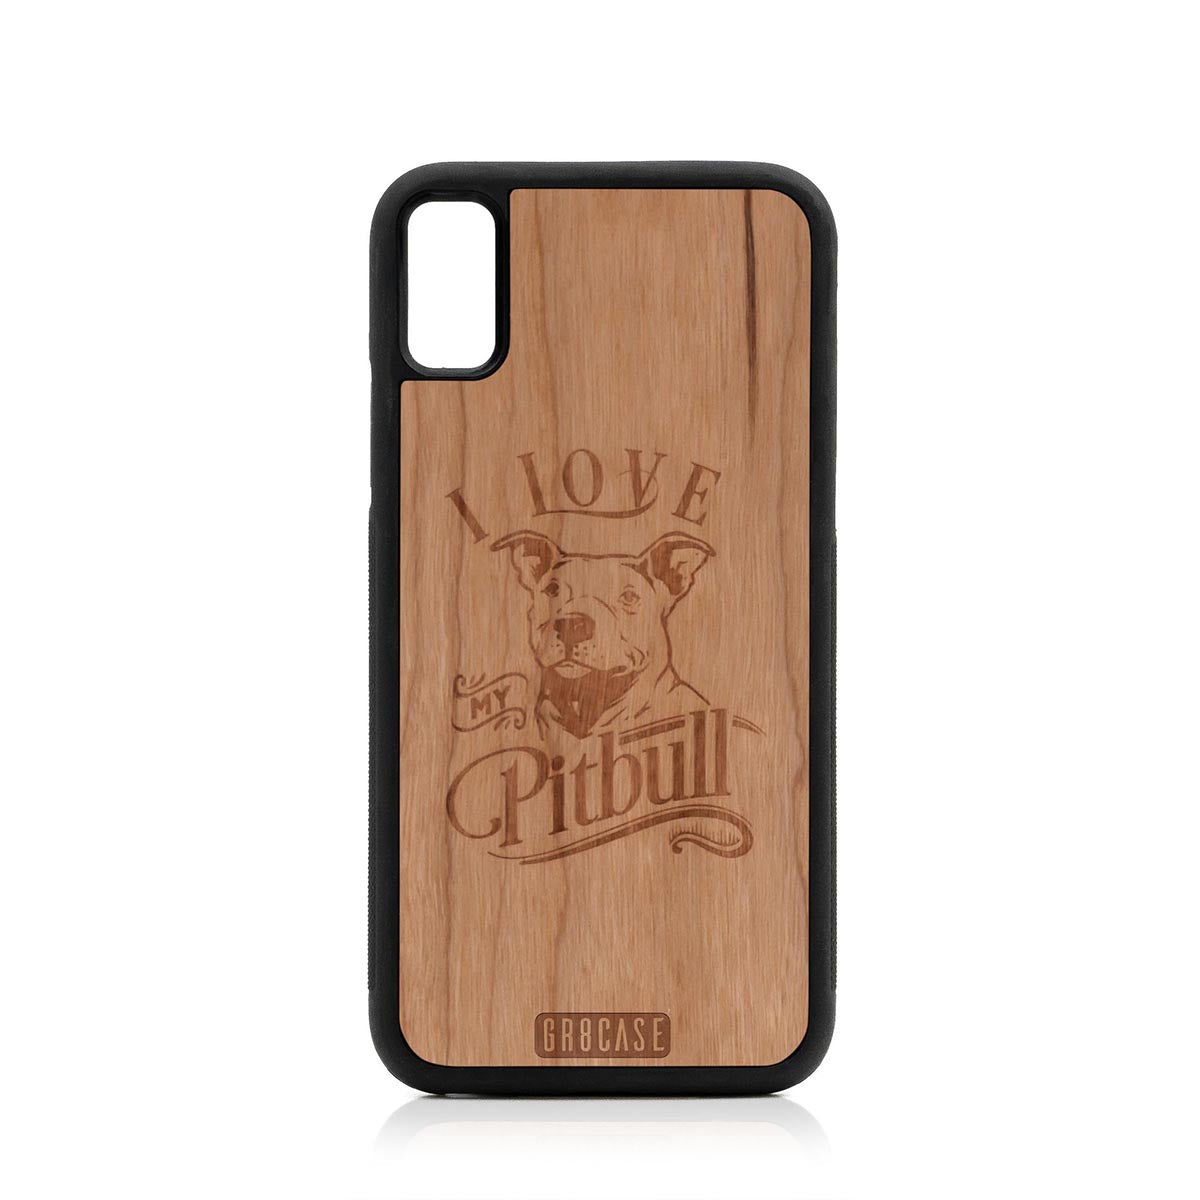 I Love My Pitbull Design Wood Case For iPhone X/XS by GR8CASE